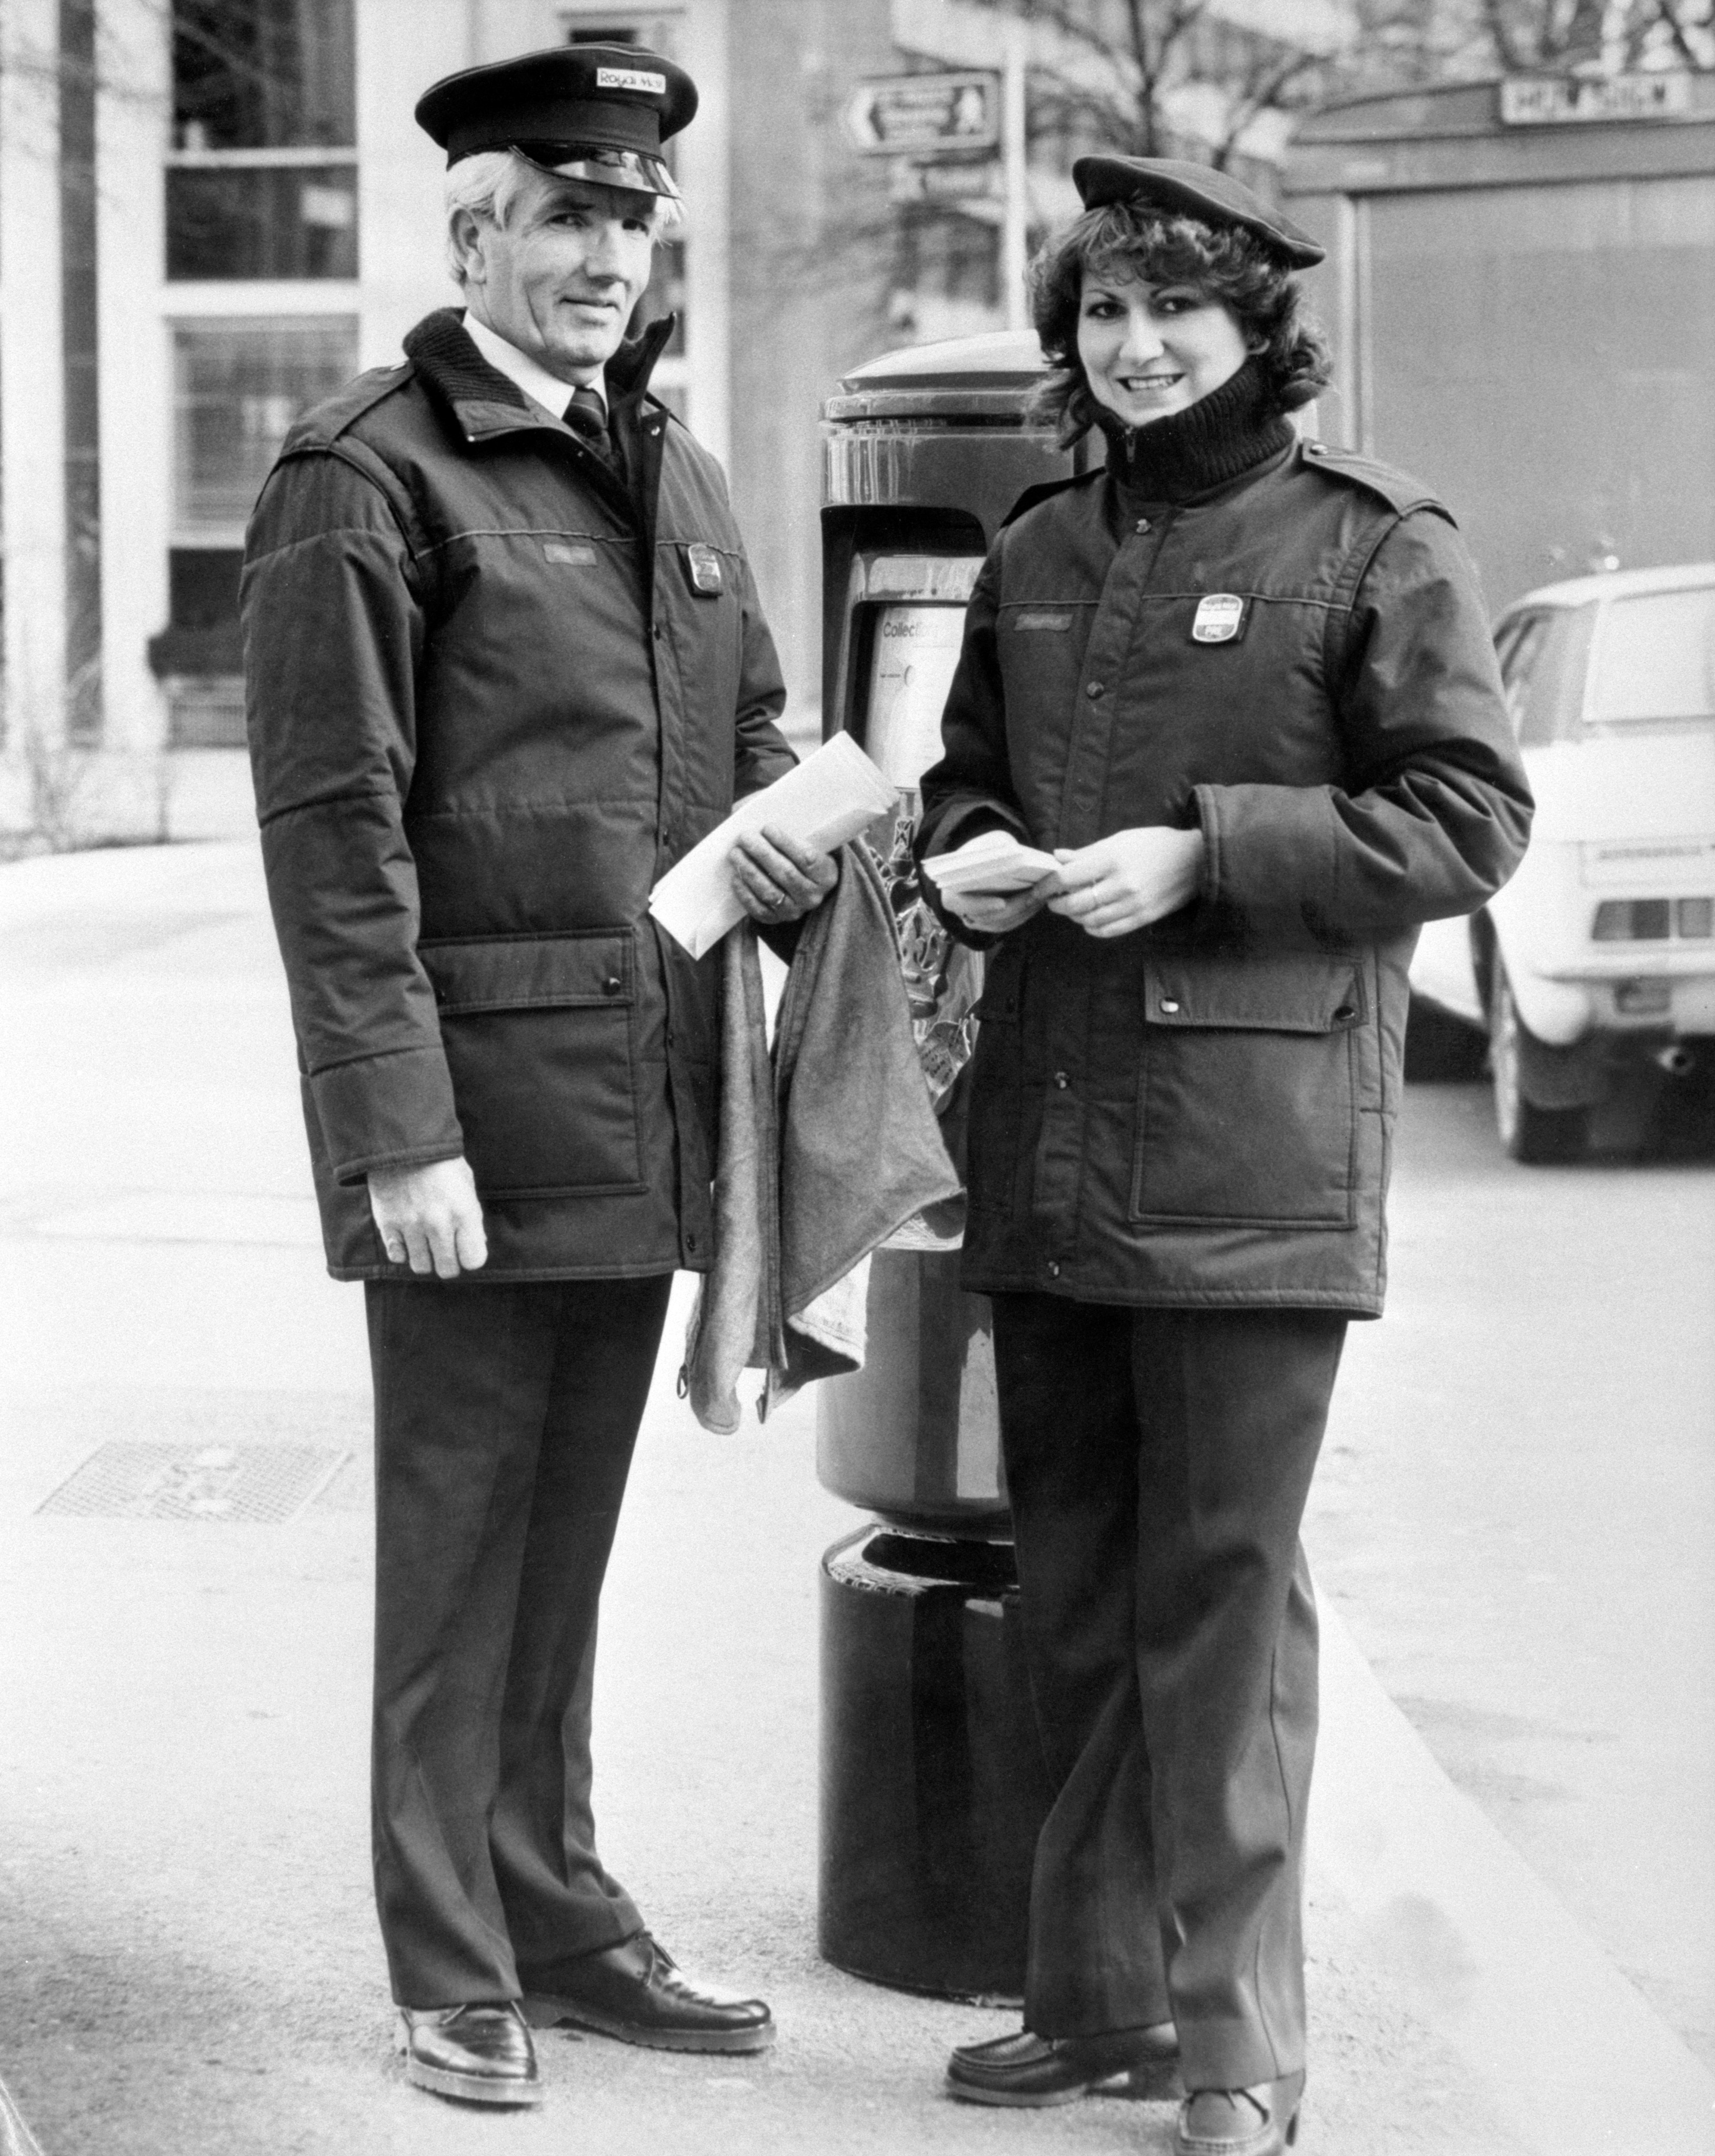 Two postal workers model the latest dresswear for winter weather